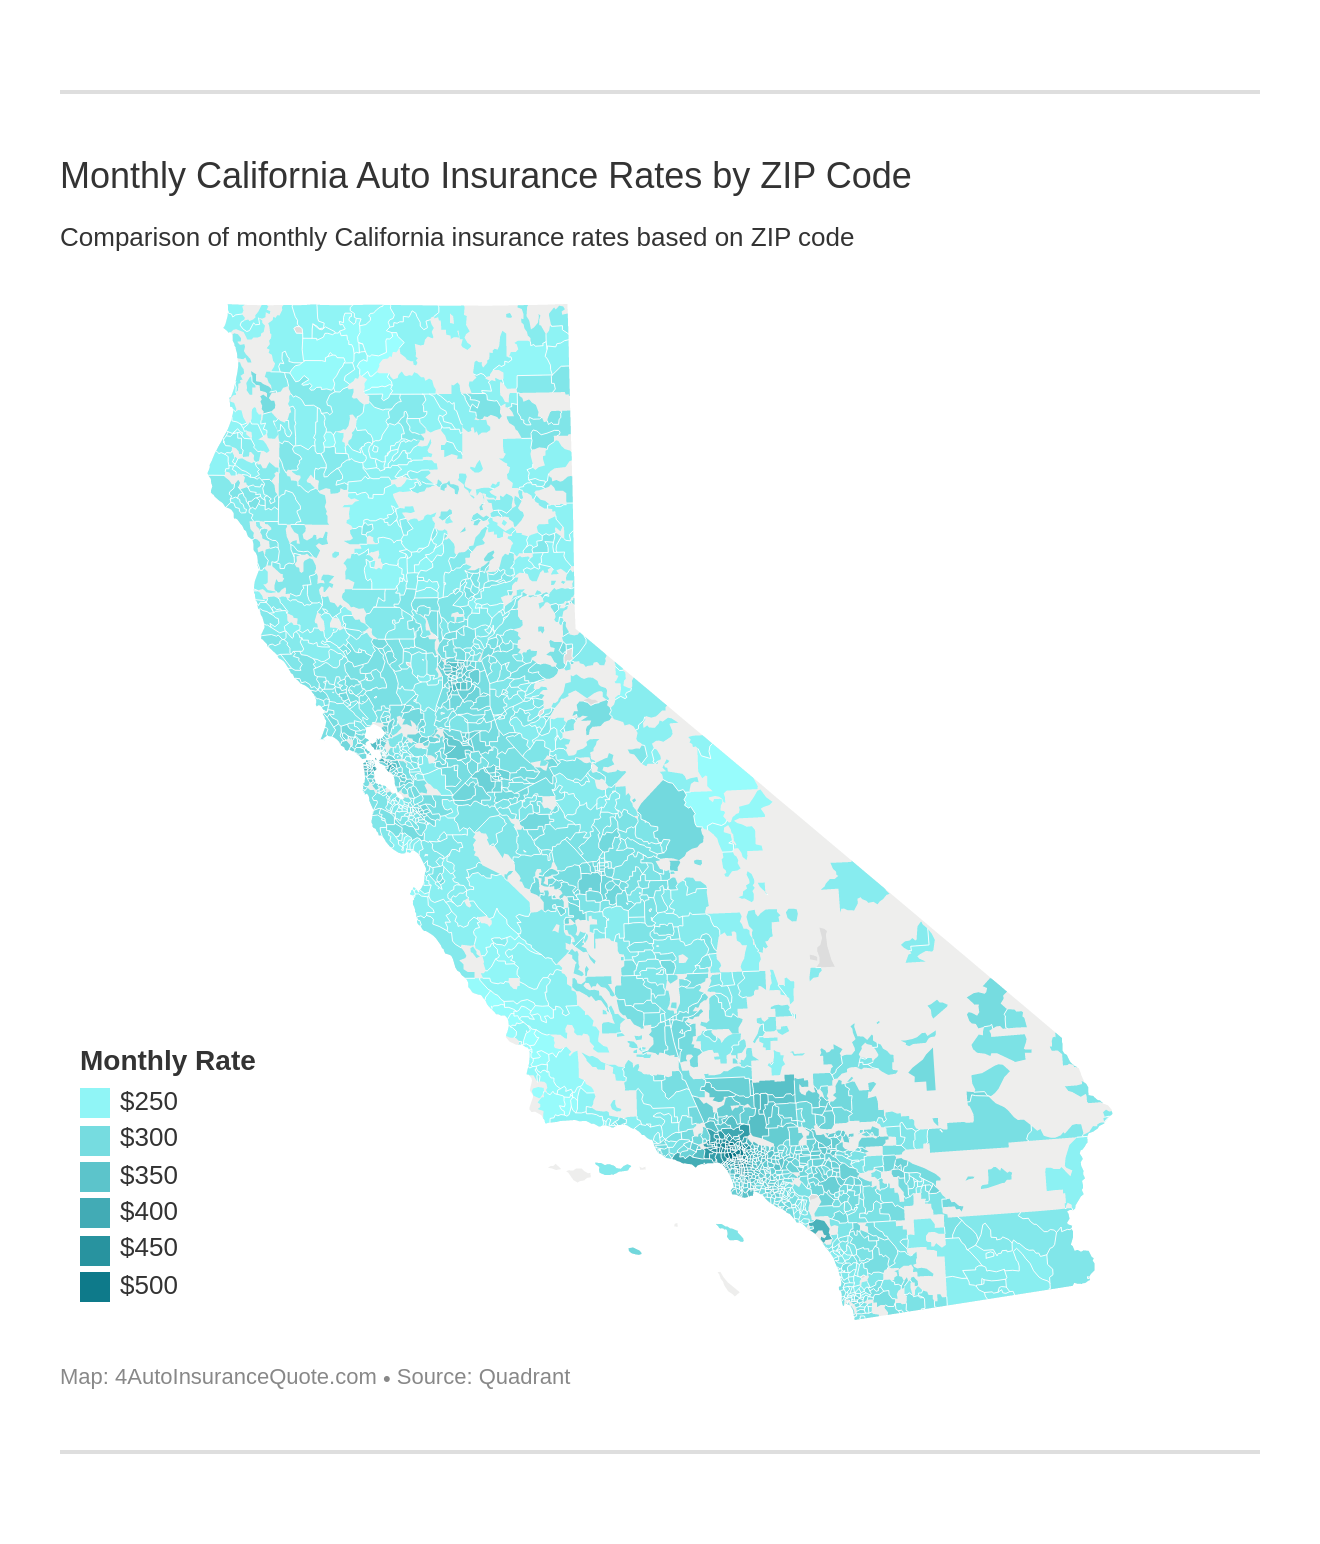 Monthly California Auto Insurance Rates by ZIP Code